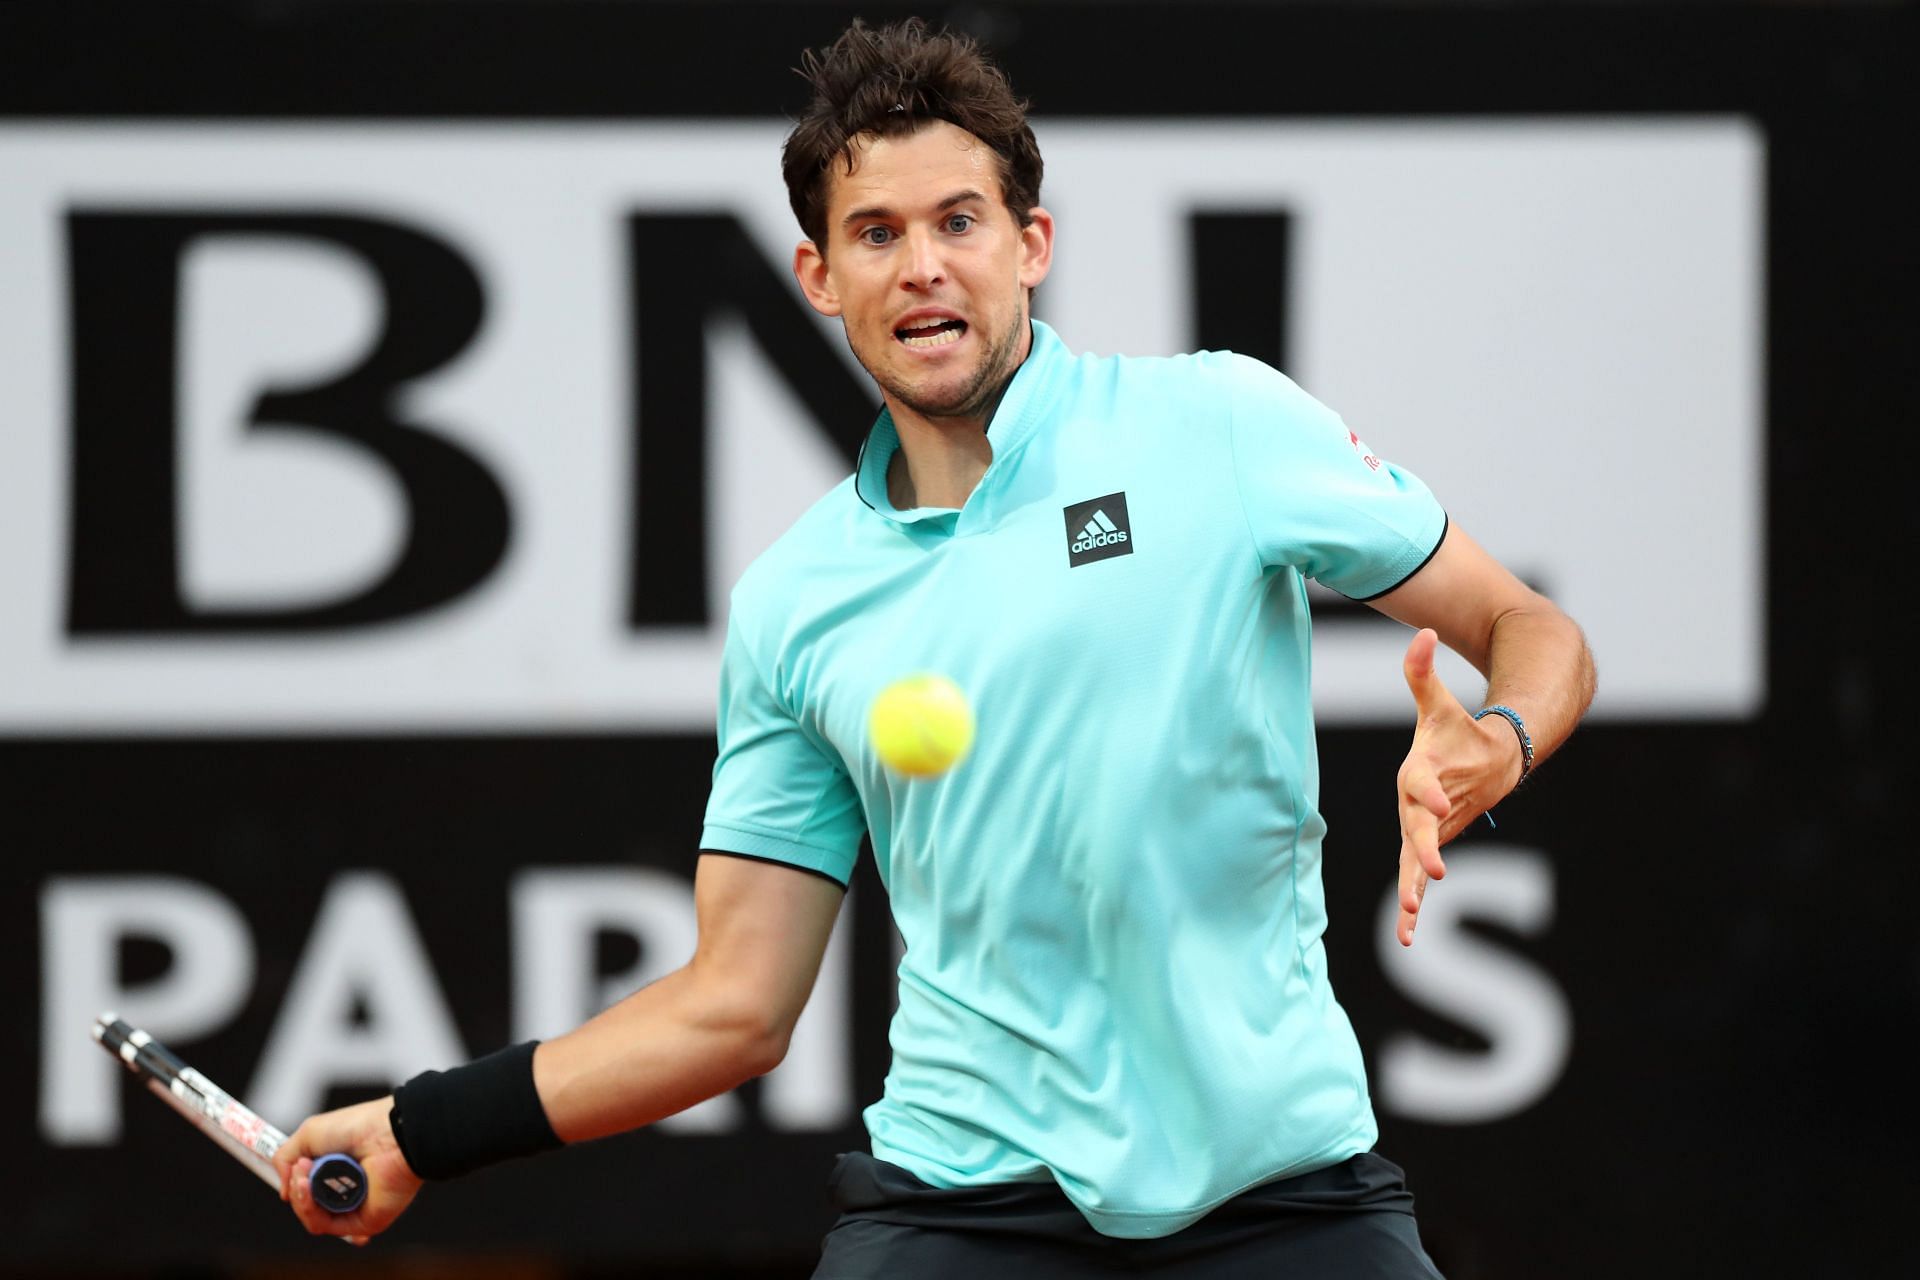 Dominic Thiem will be eager to reach his second successive quarterfinal on the ATP Tour